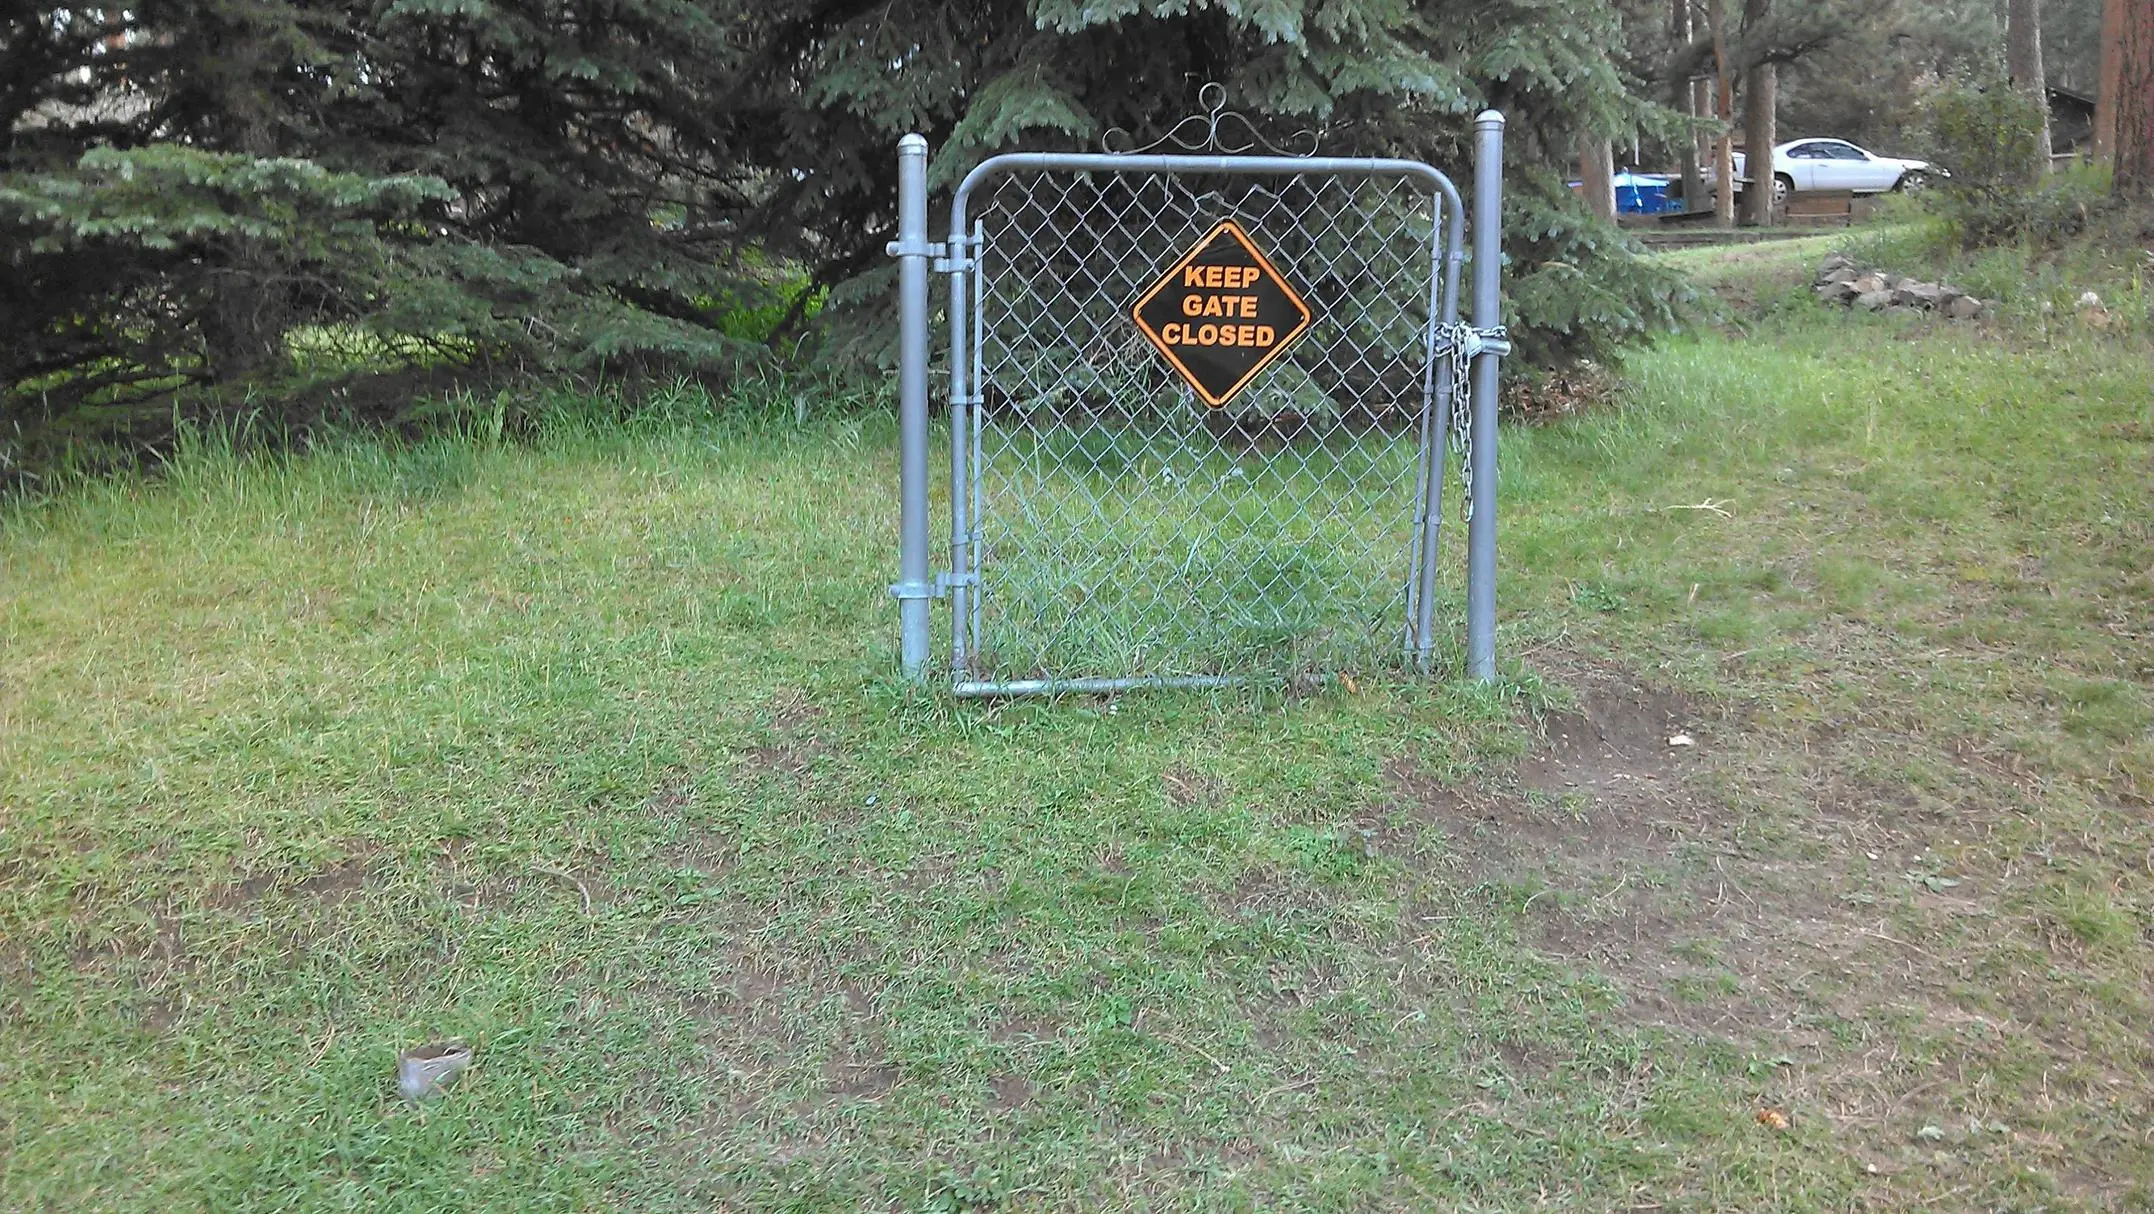 A locked gate with no fence around it